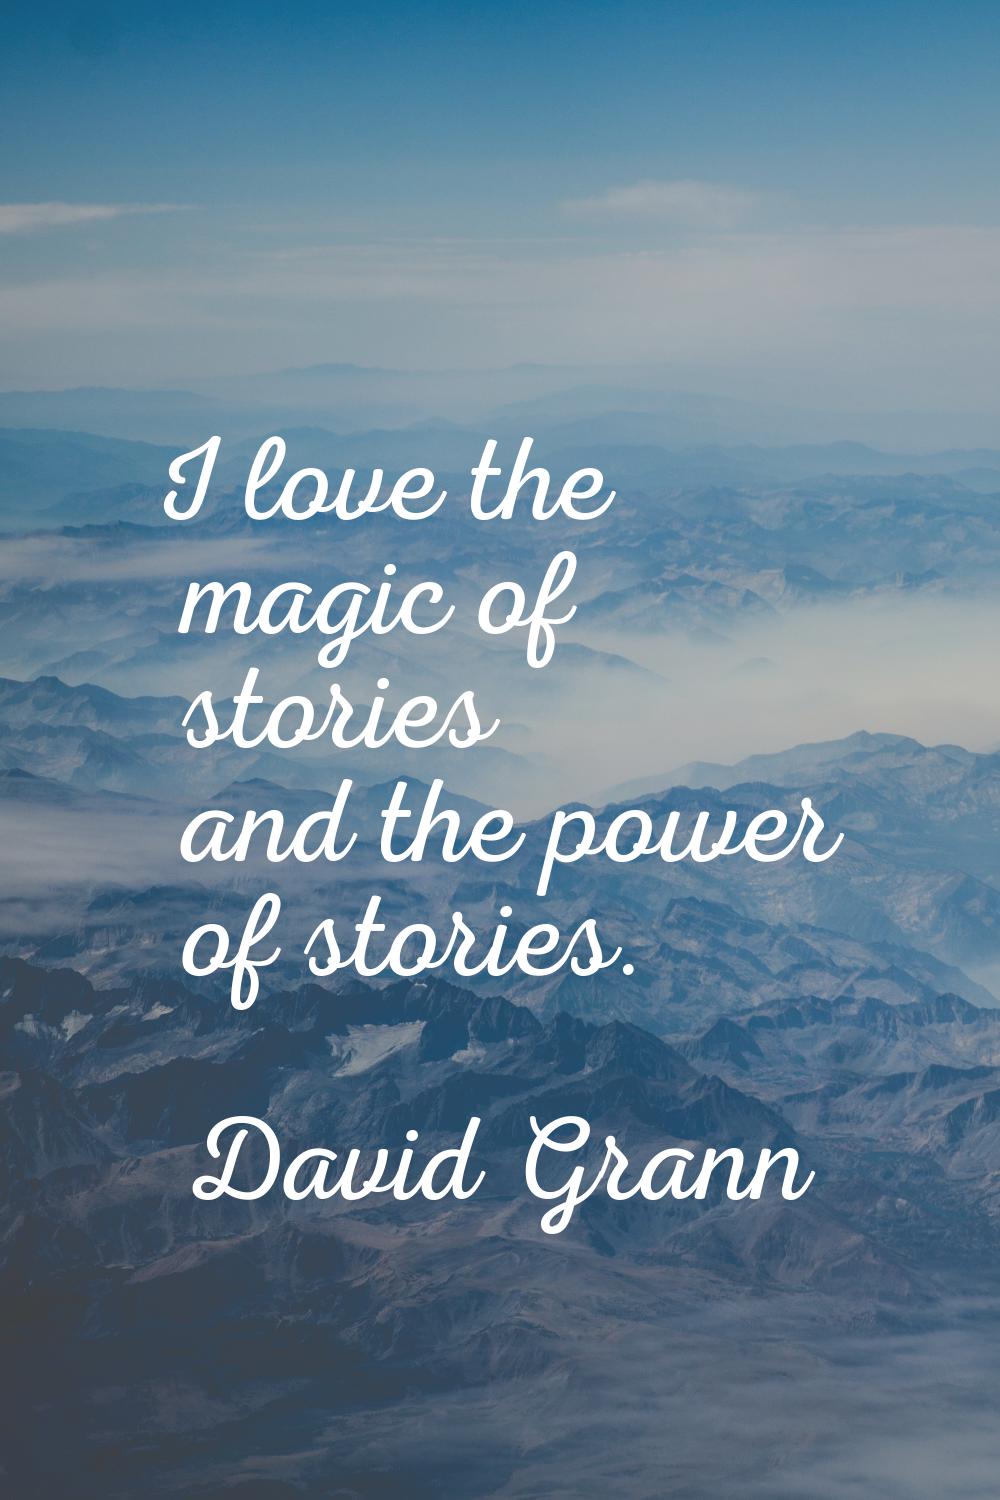 I love the magic of stories and the power of stories.